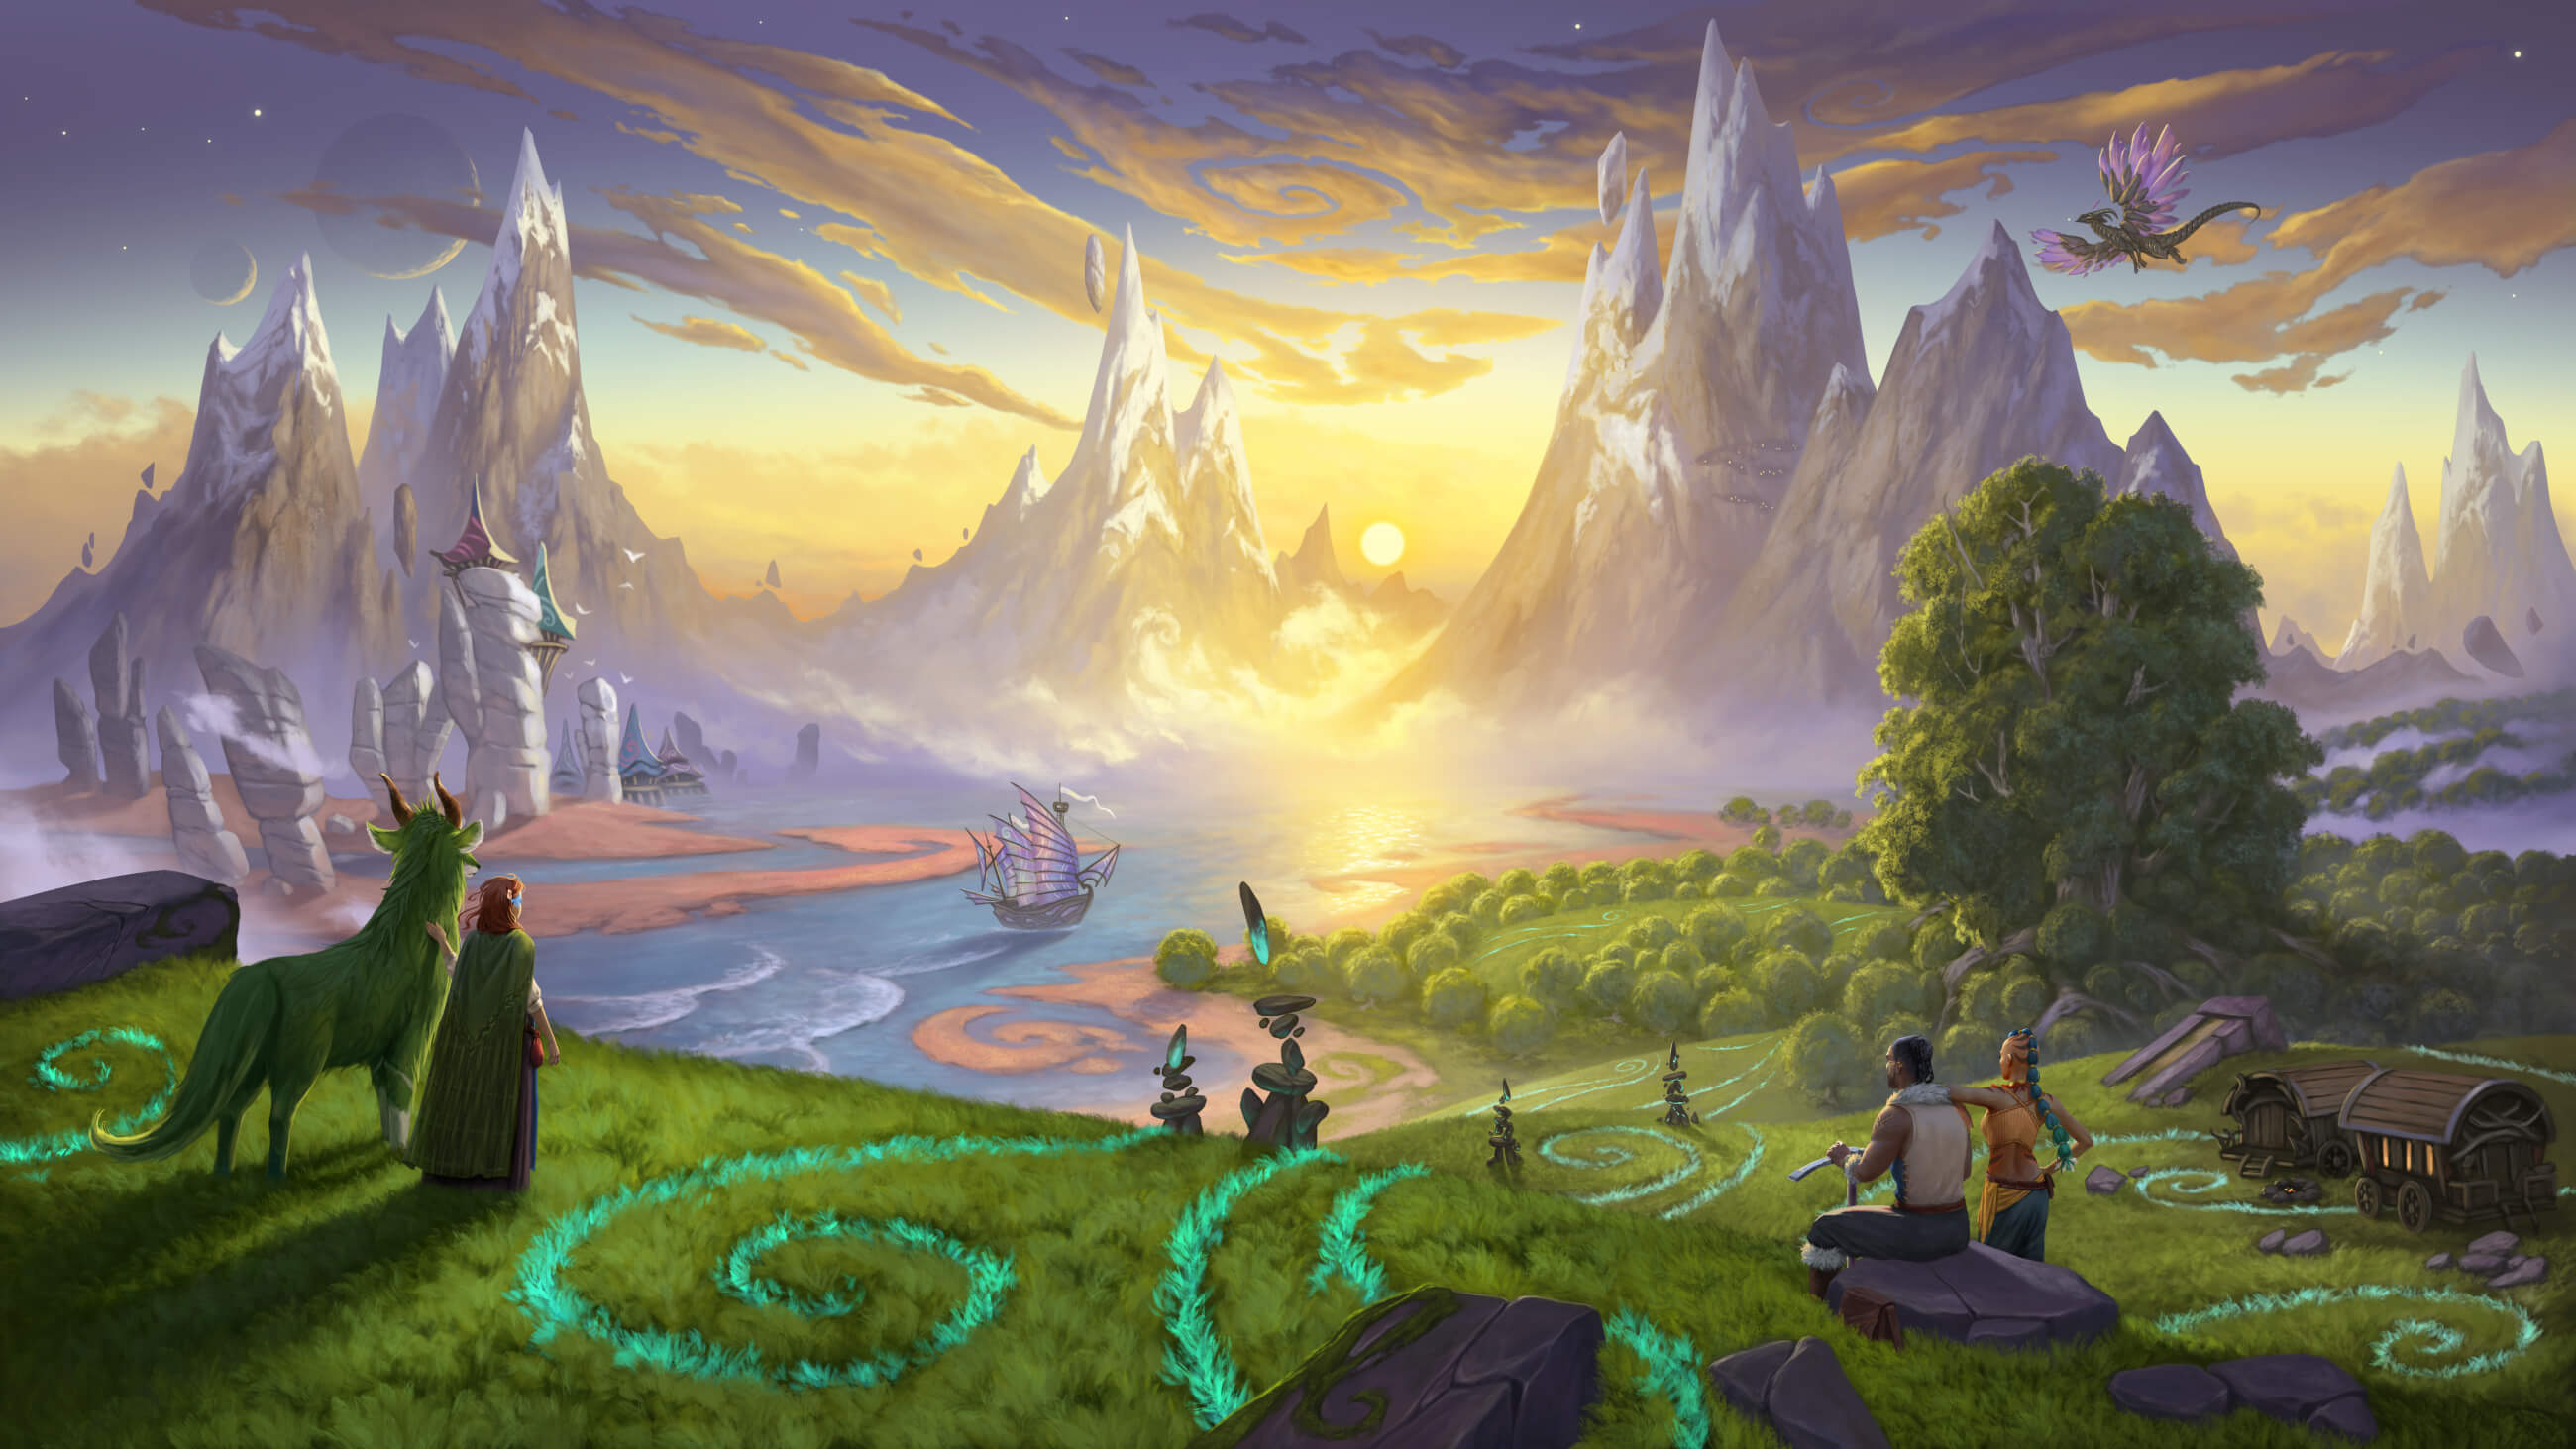 A fantasy landscape scene depicts the magical world of Mythas, complete with floating mountains, glowing grasses, floating cairns, and a dragon in the distance.